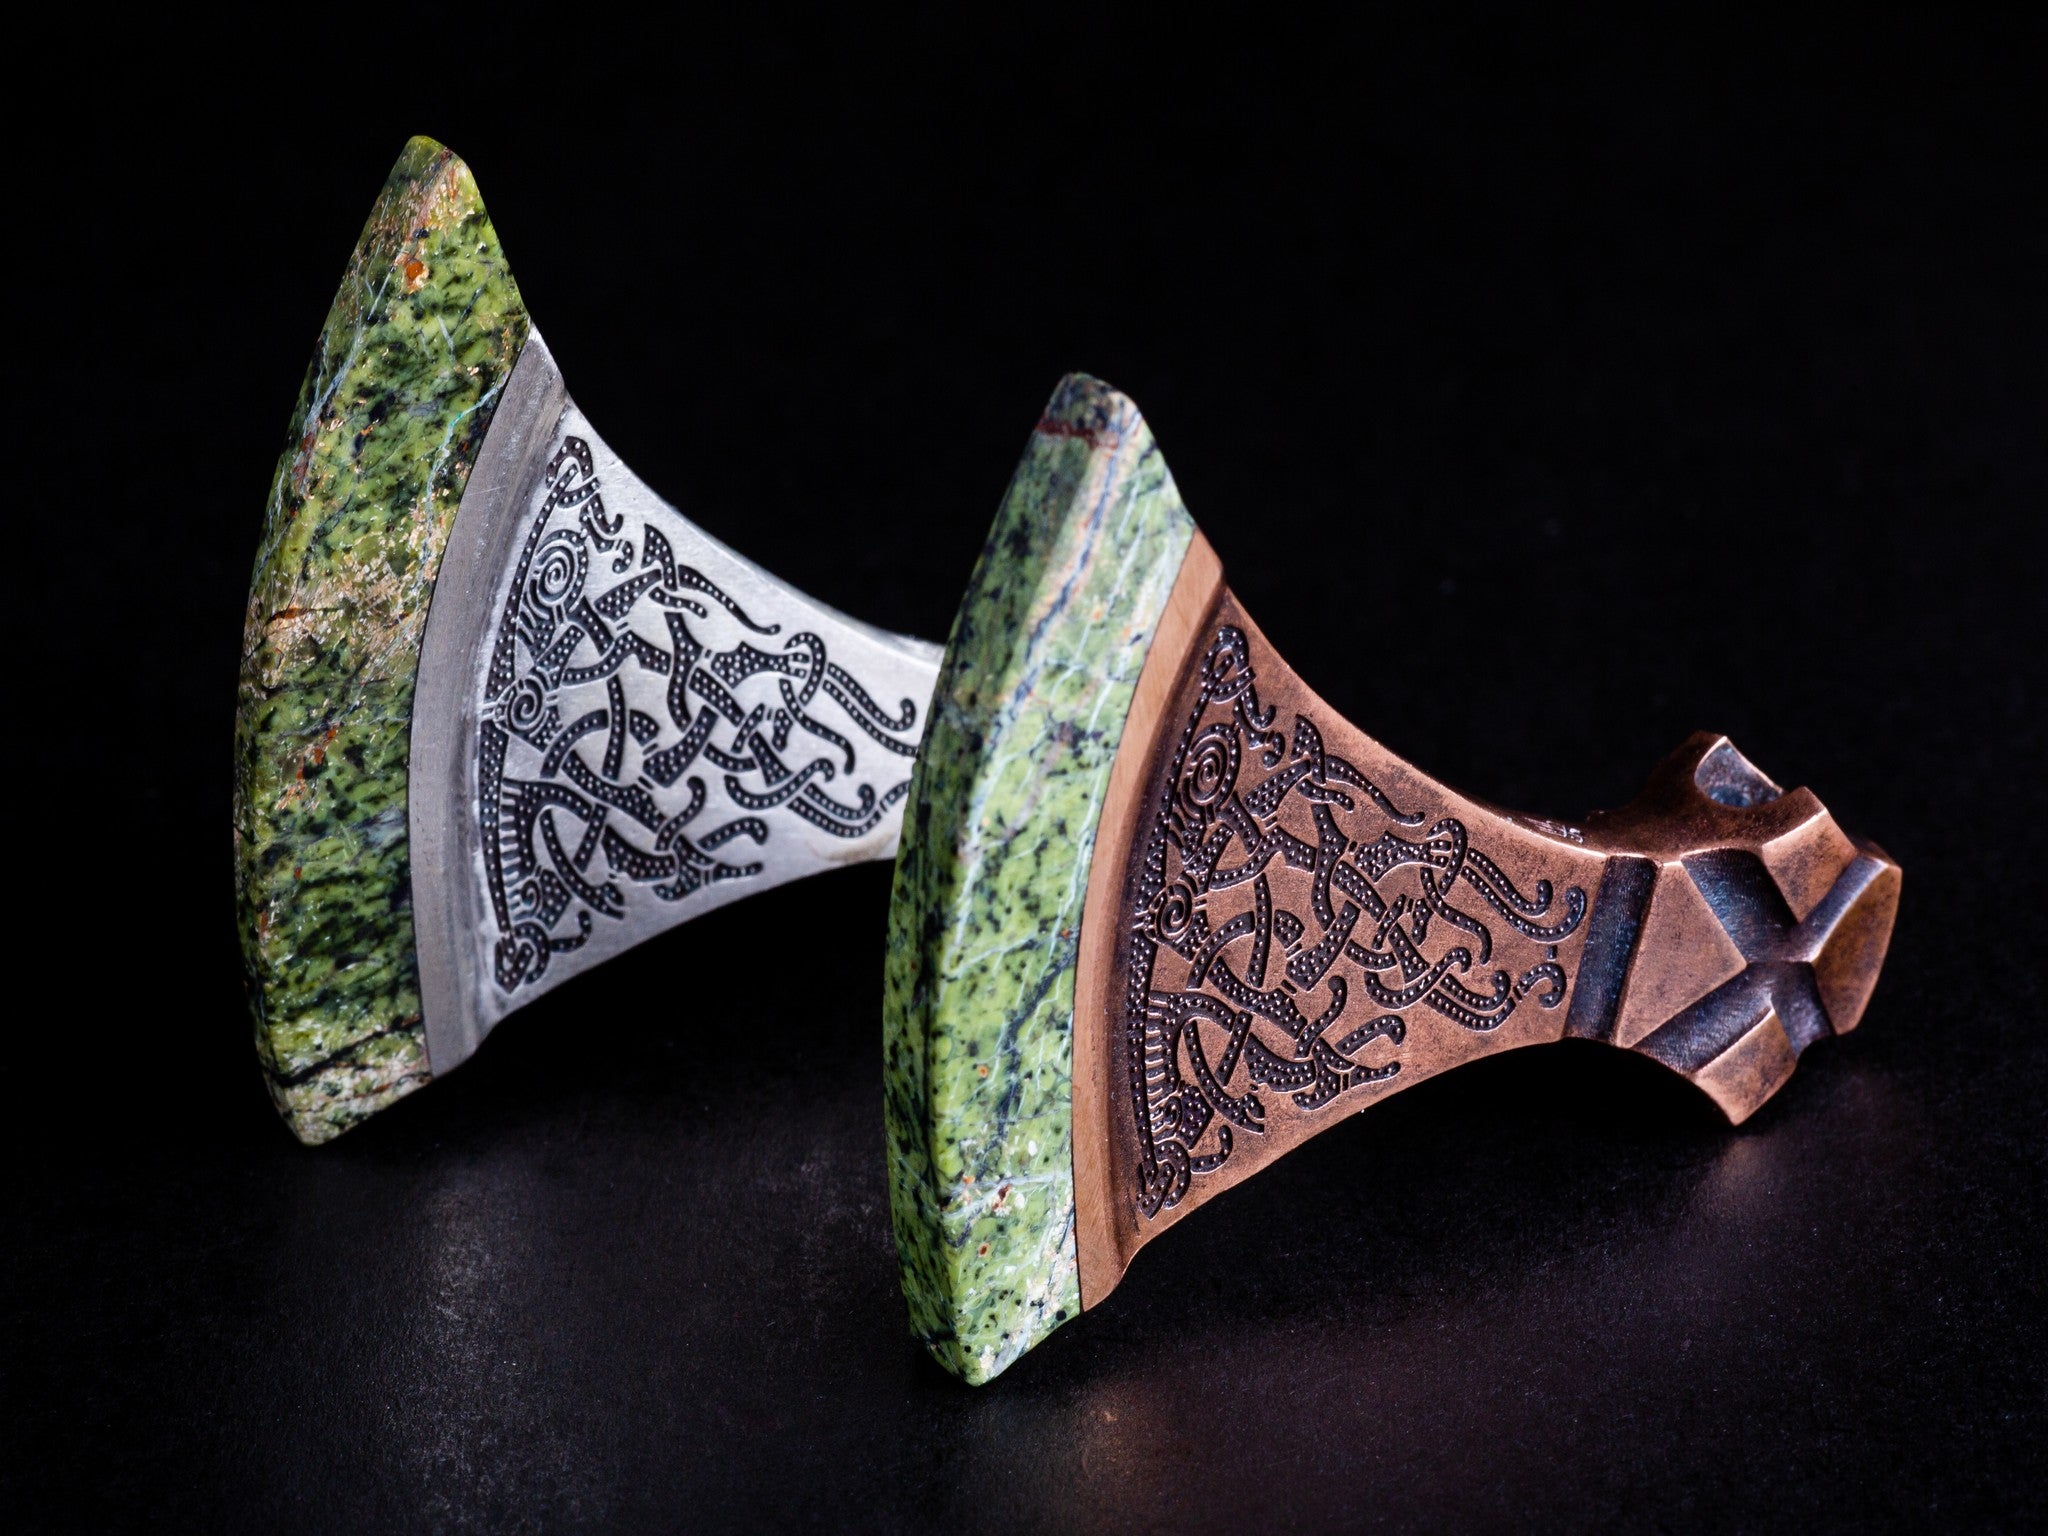 green stone blades of axes with black inclusions in the stone